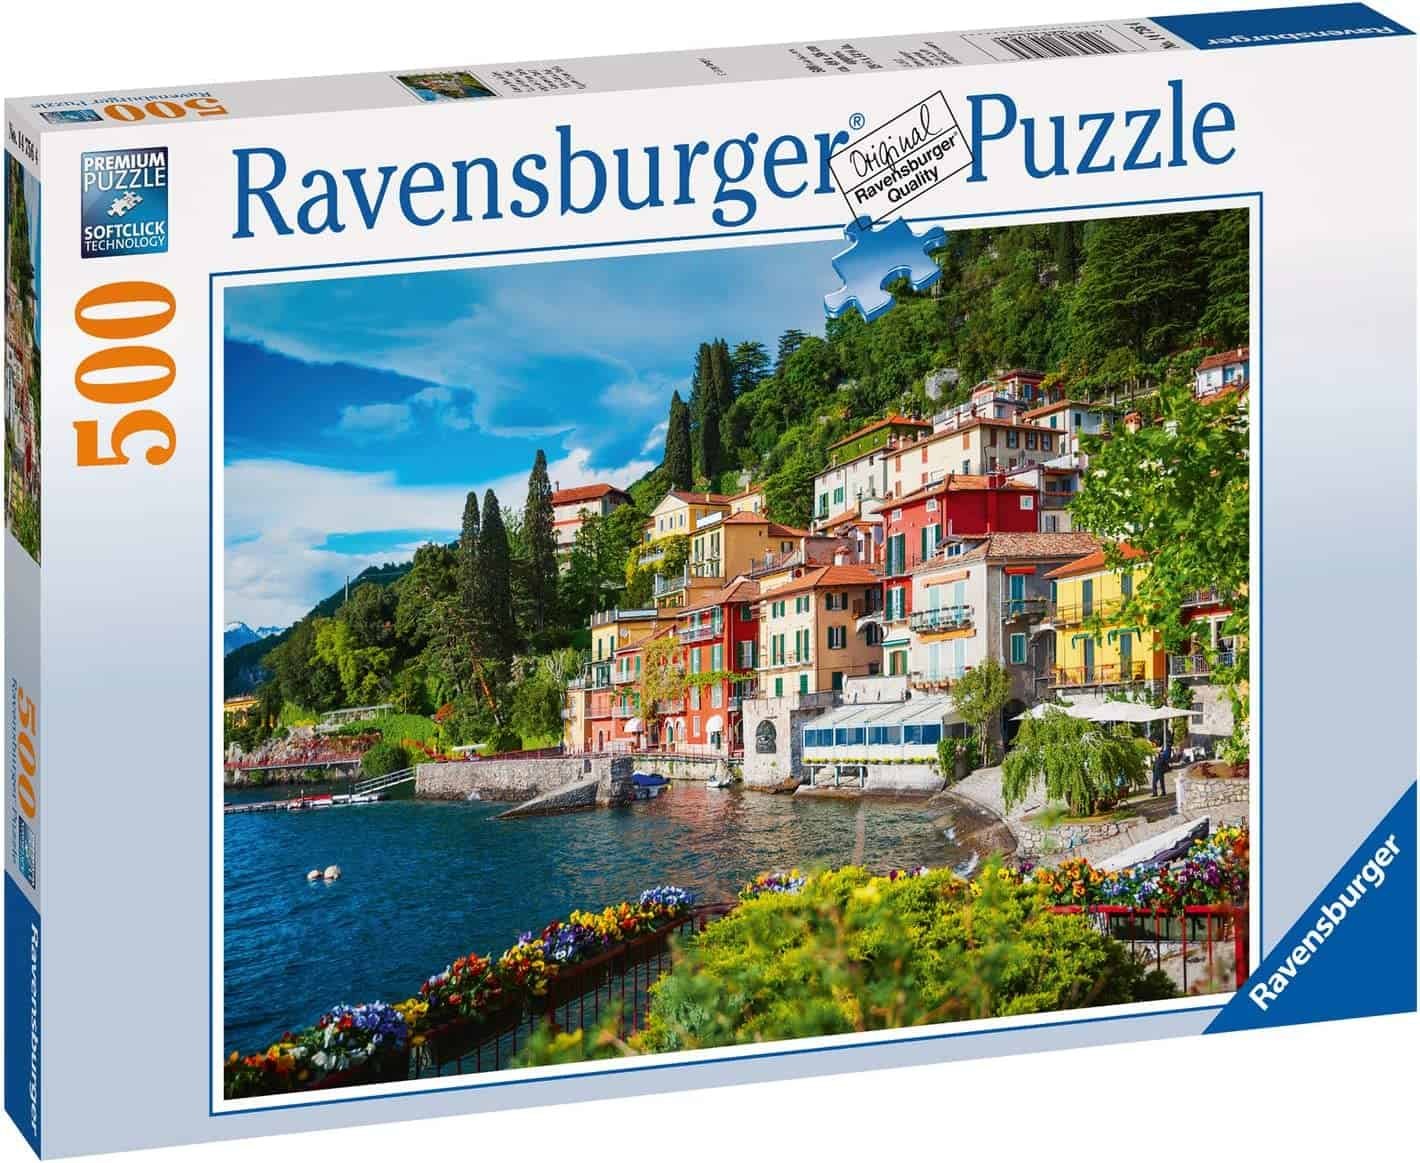 Ravensburger Puzzle Comer See Teile